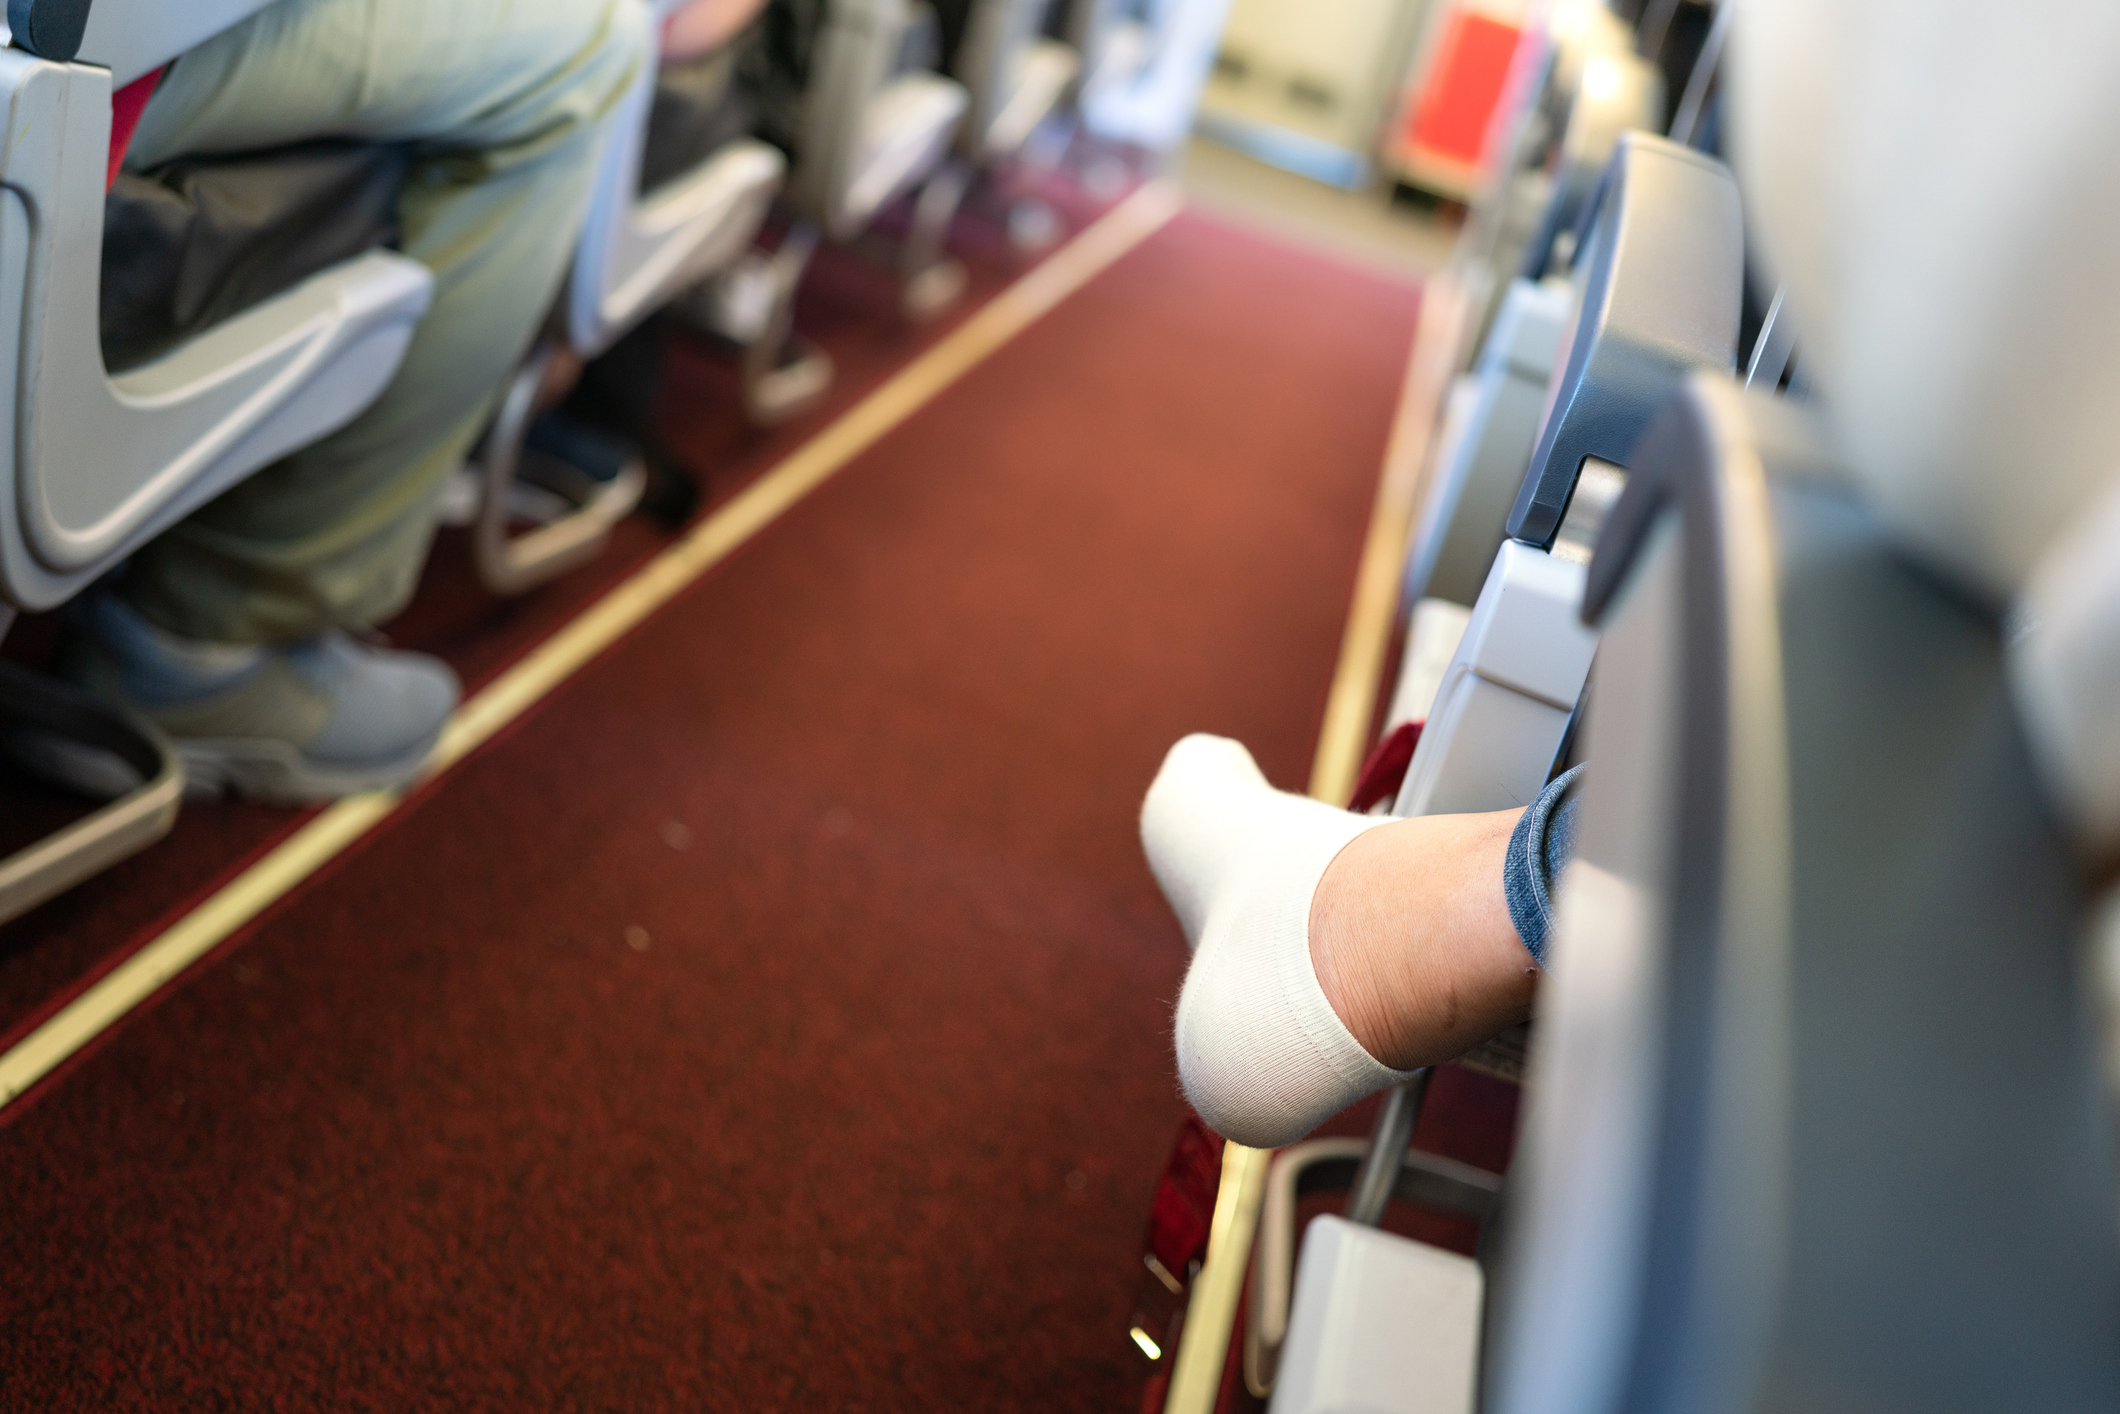 Passenger with feet up on airplane seats showcasing inconsiderate travel behavior